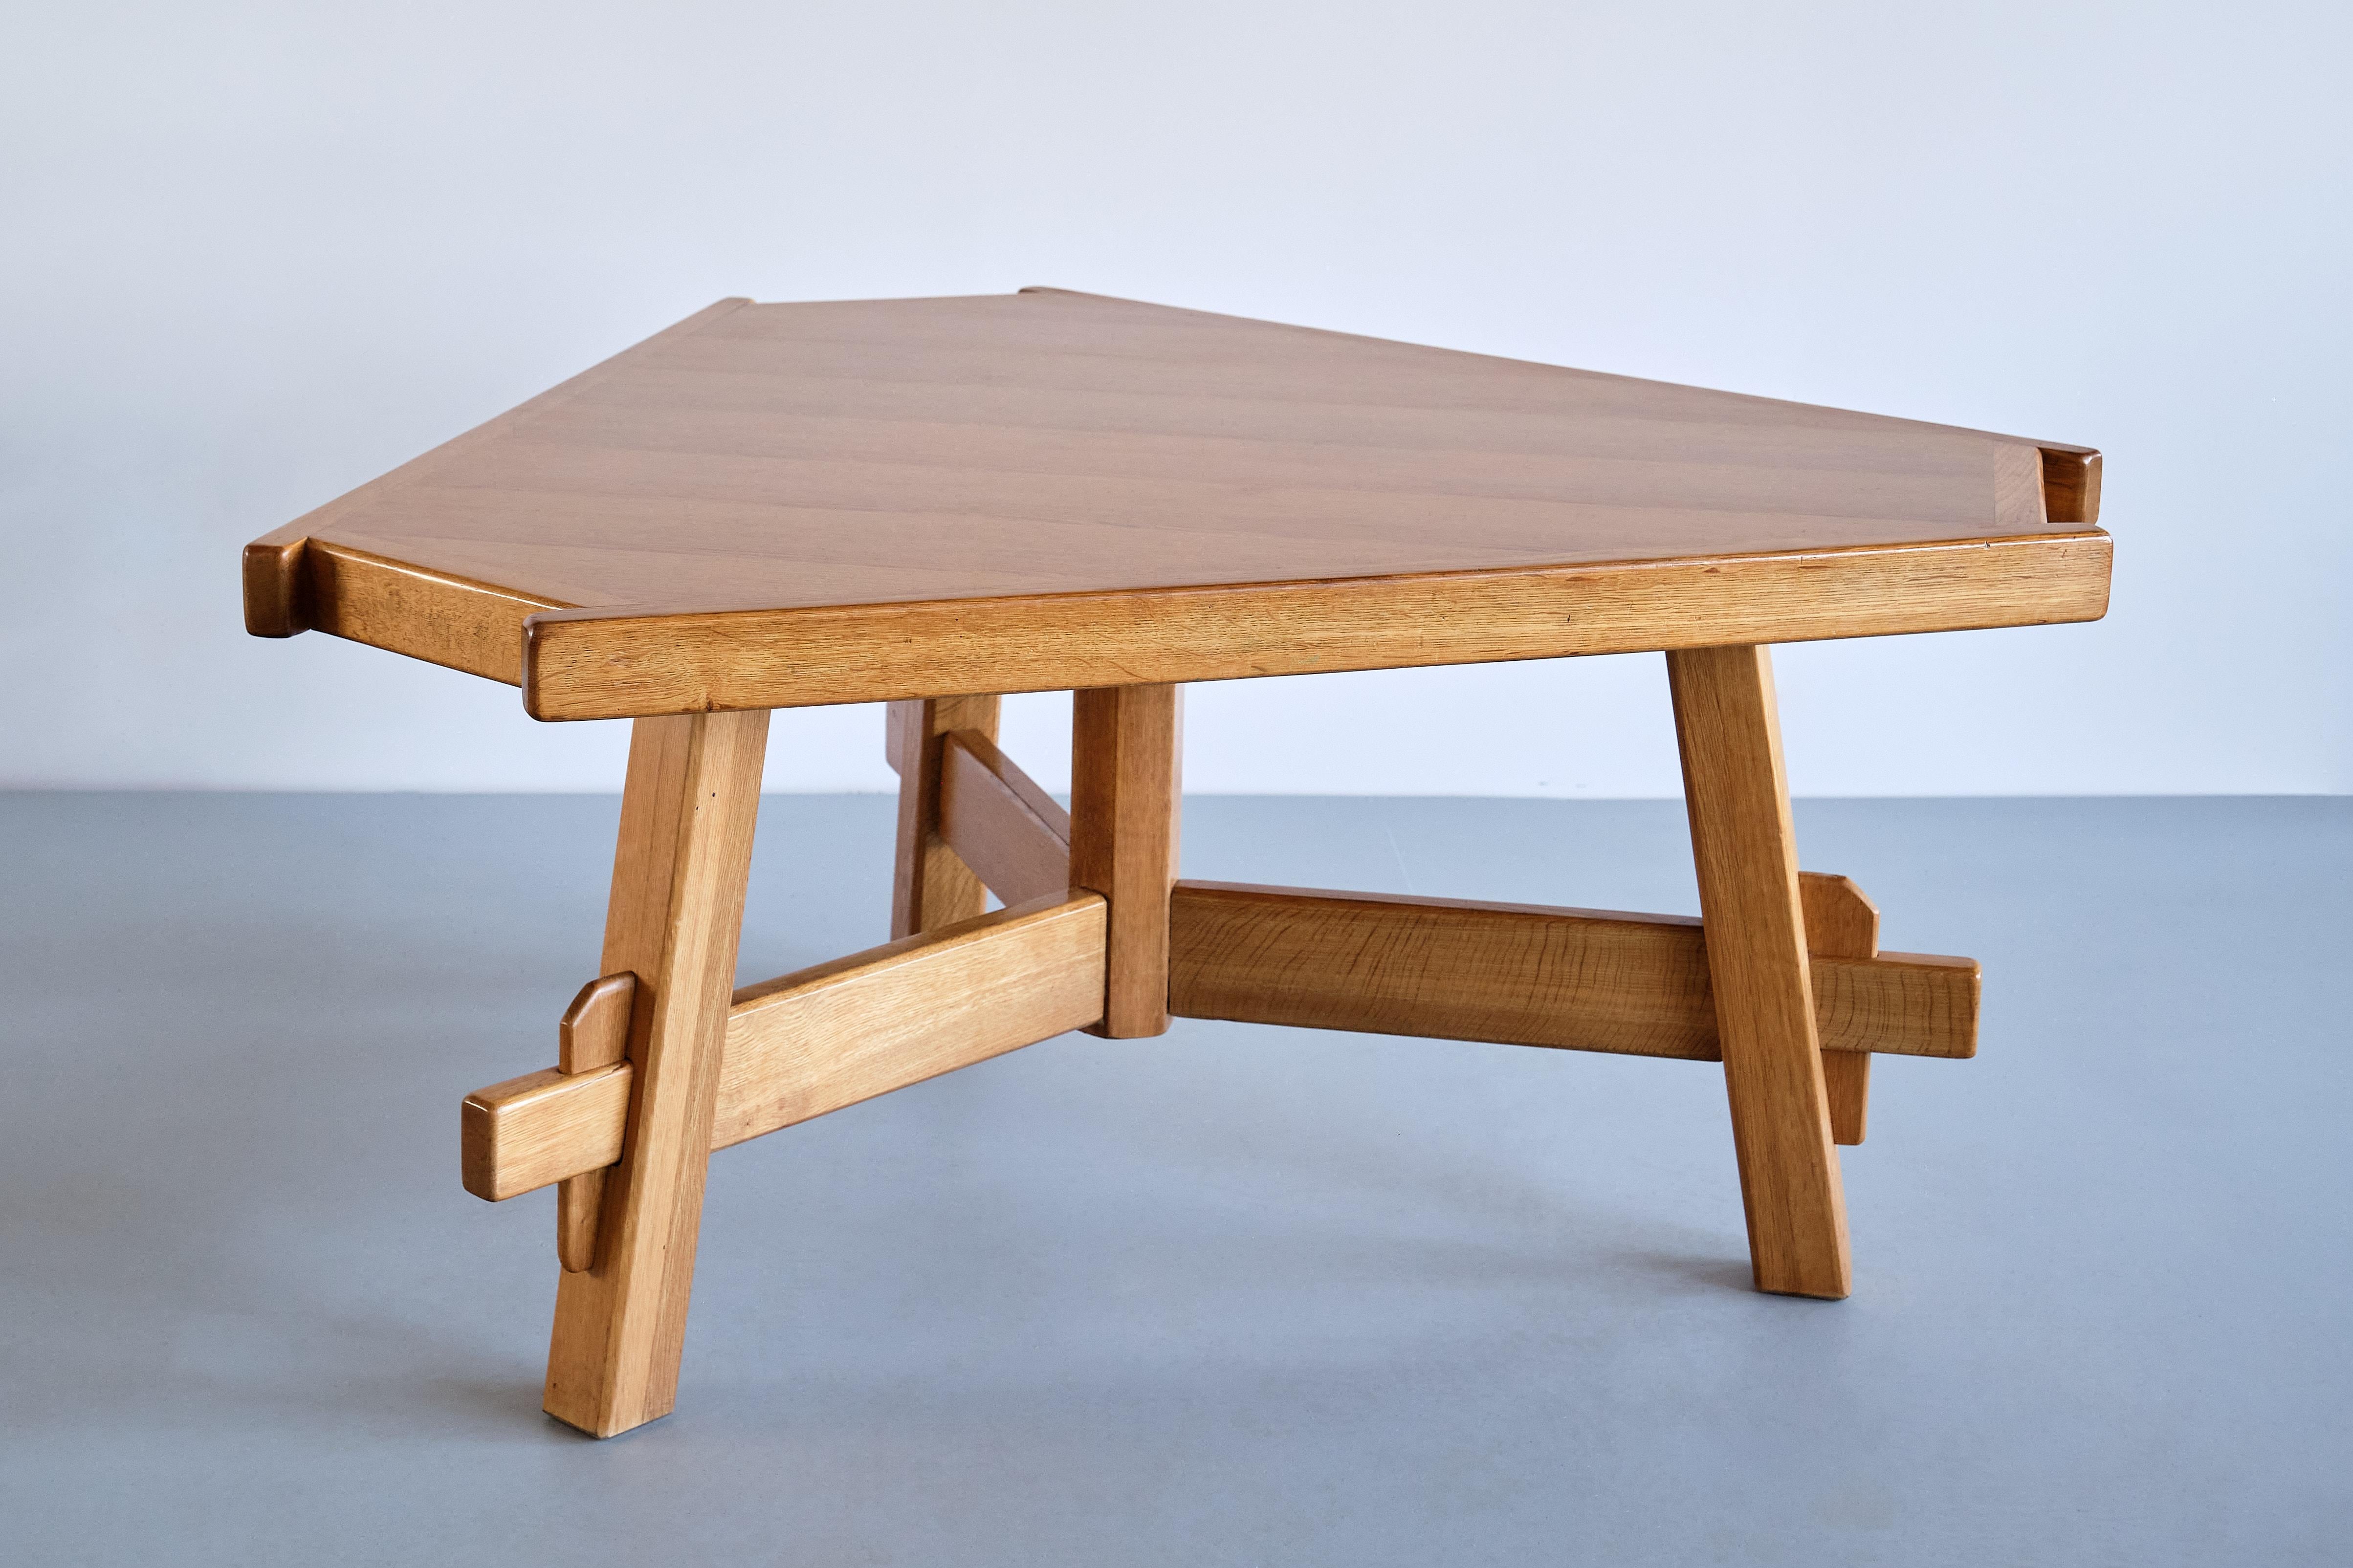 Triangular French Modern Dining Table in Solid Oak Wood, France, 1960s For Sale 8